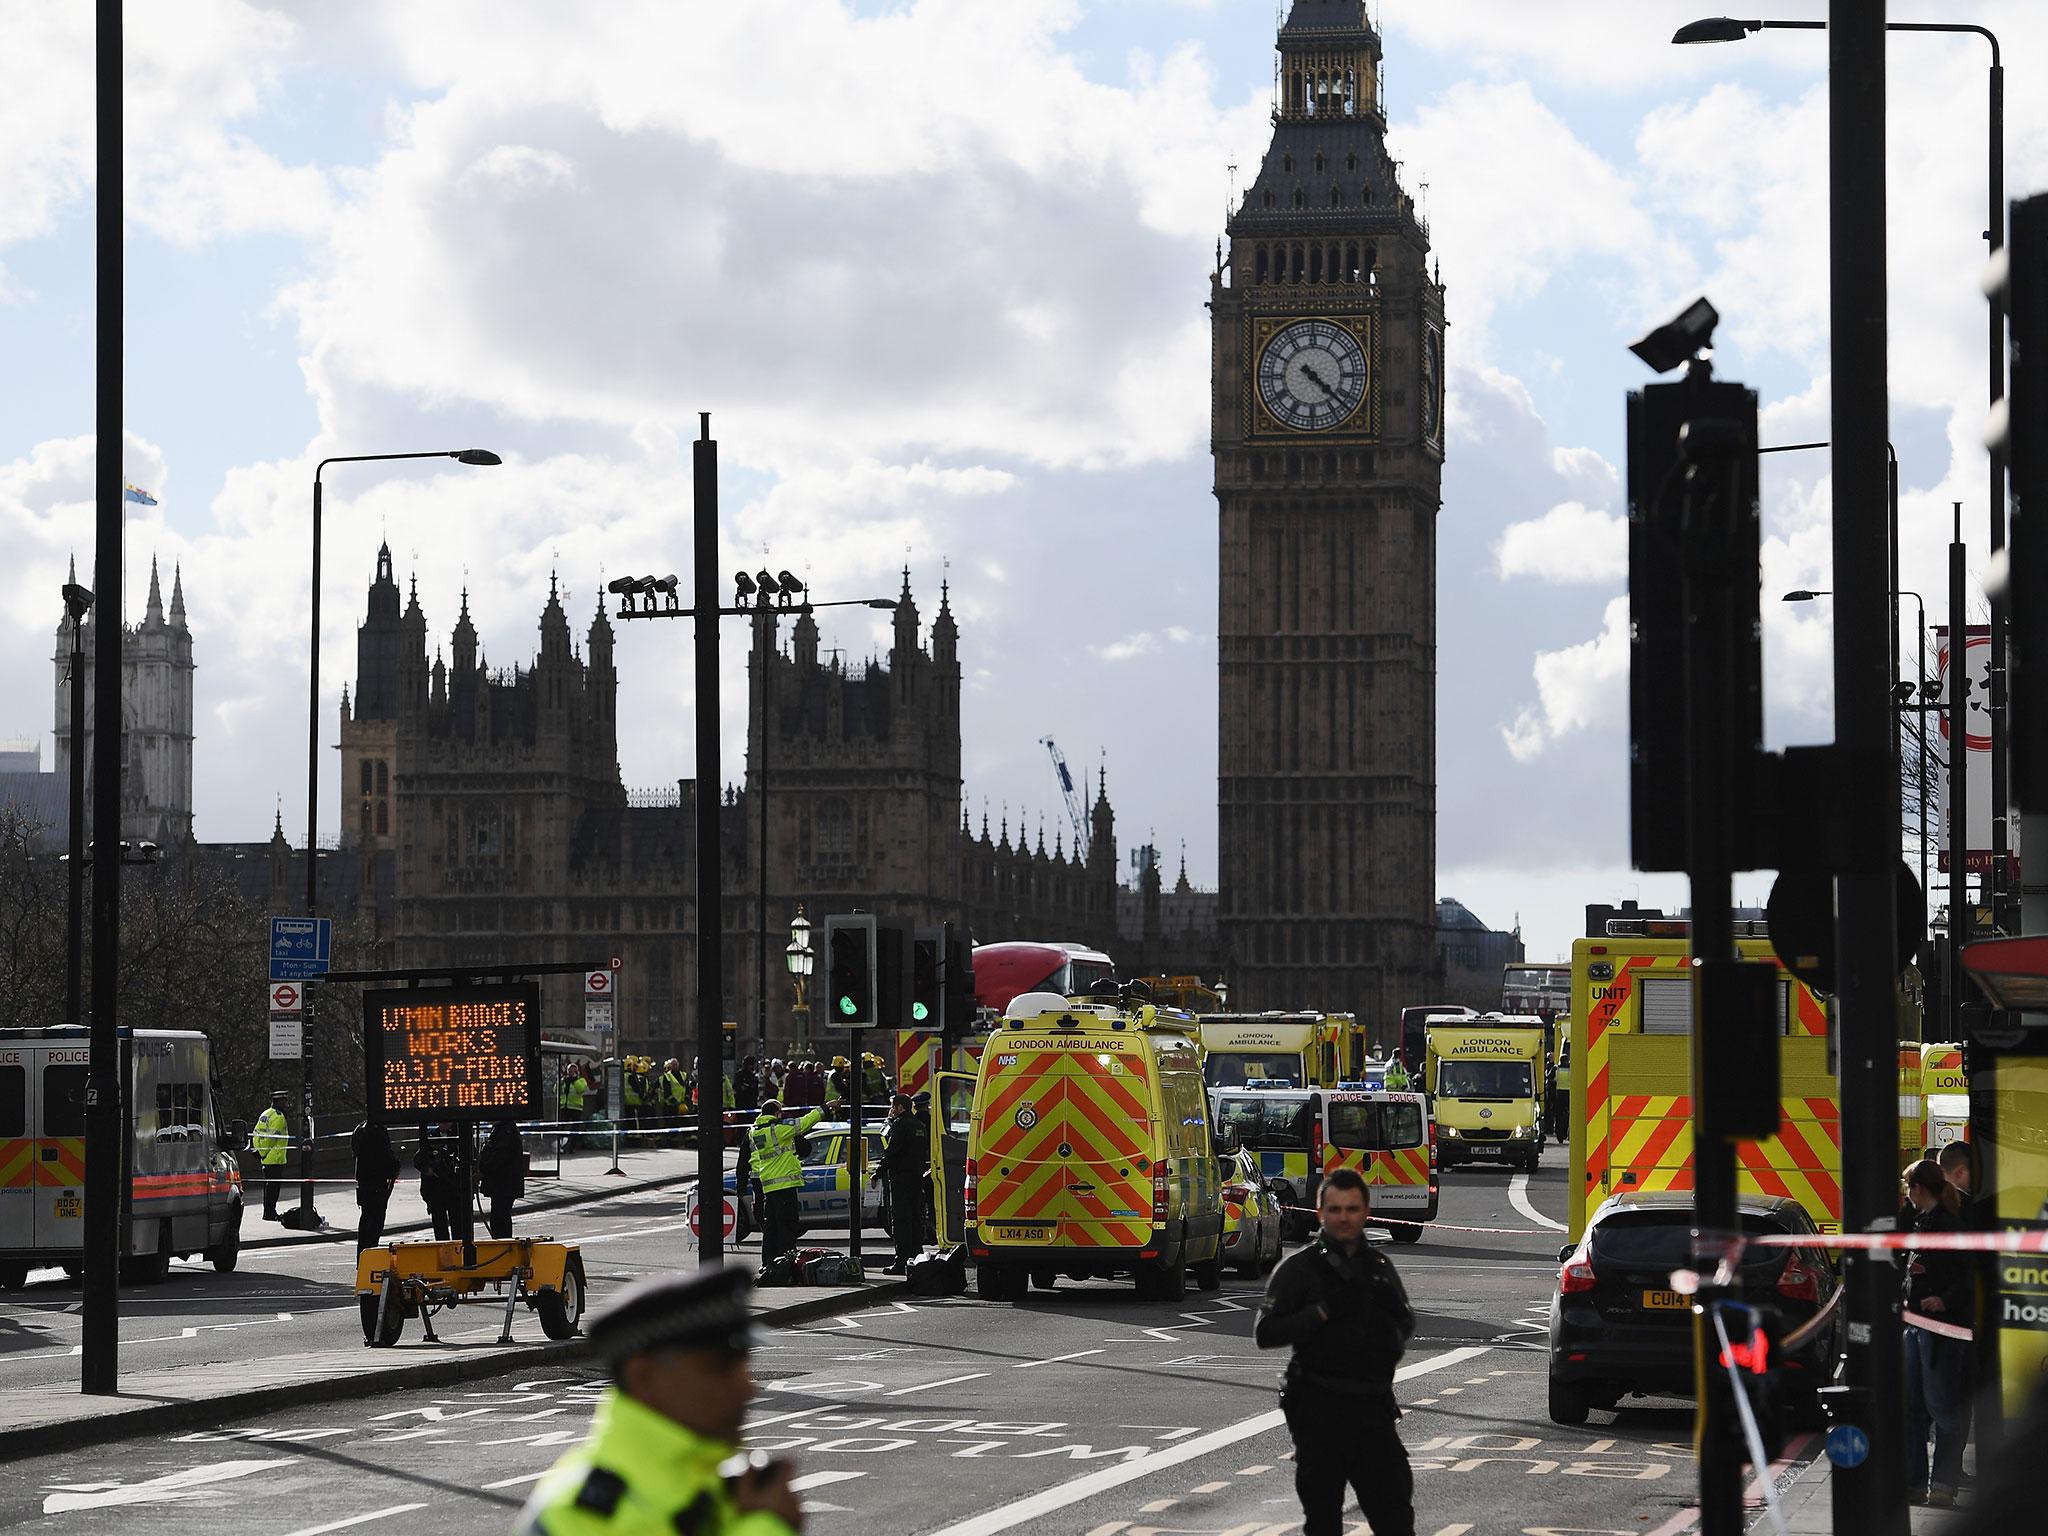 The Westminster attack on 22 March: five people were killed